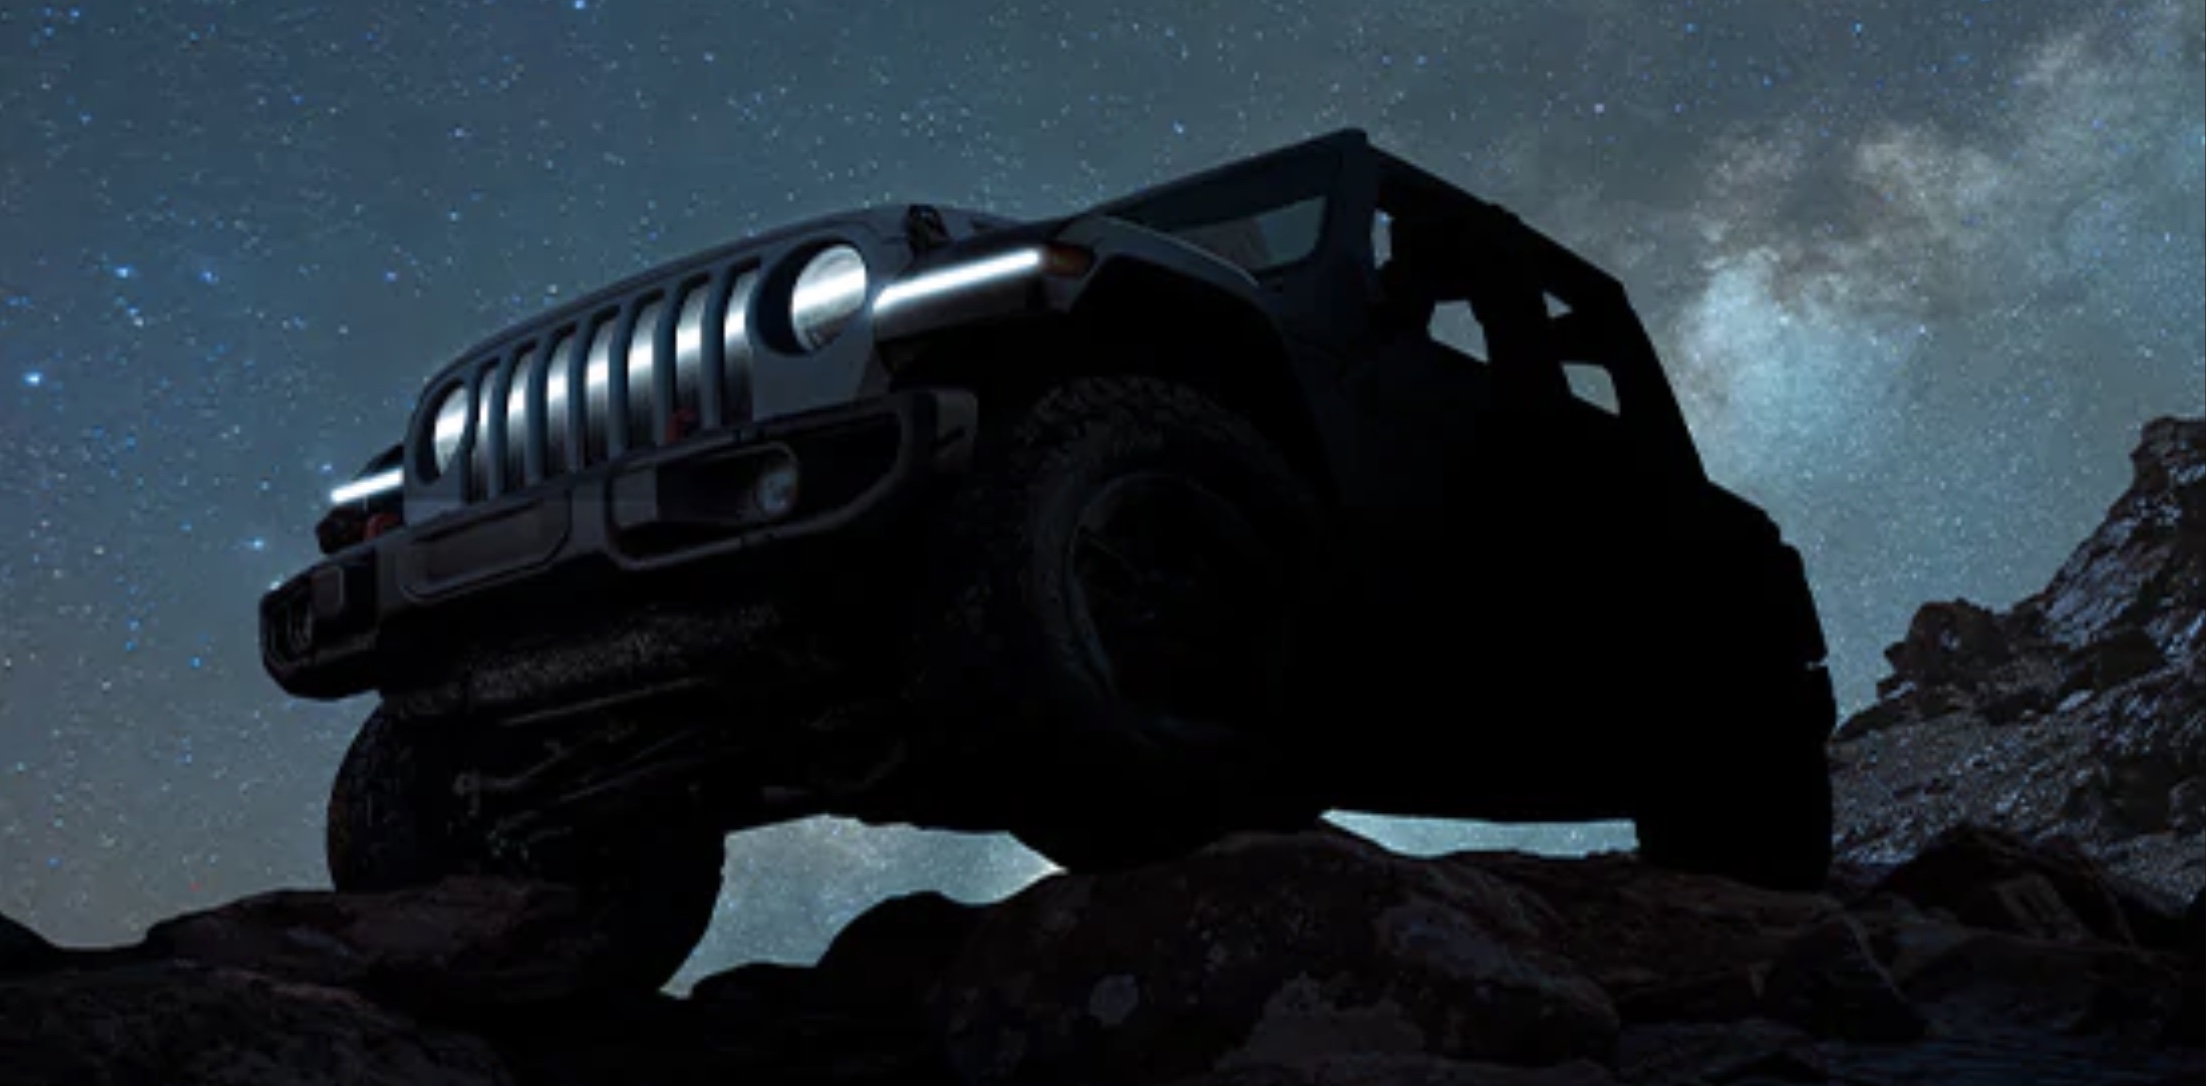 Jeep teases new Wrangler all-electric BEV concept vehicle to be unveiled  soon | Electrek